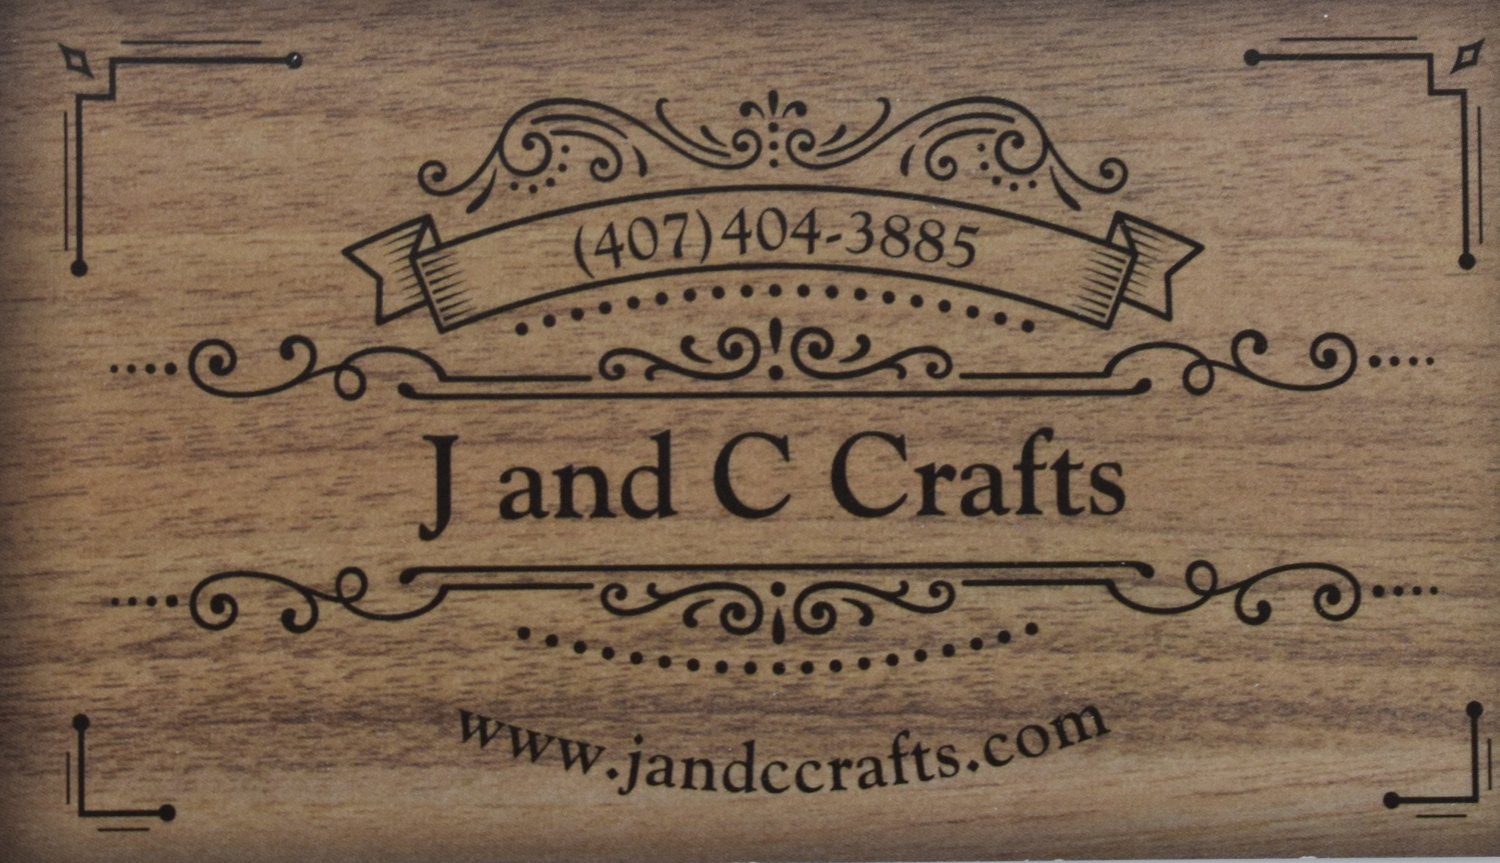 J and C Crafts